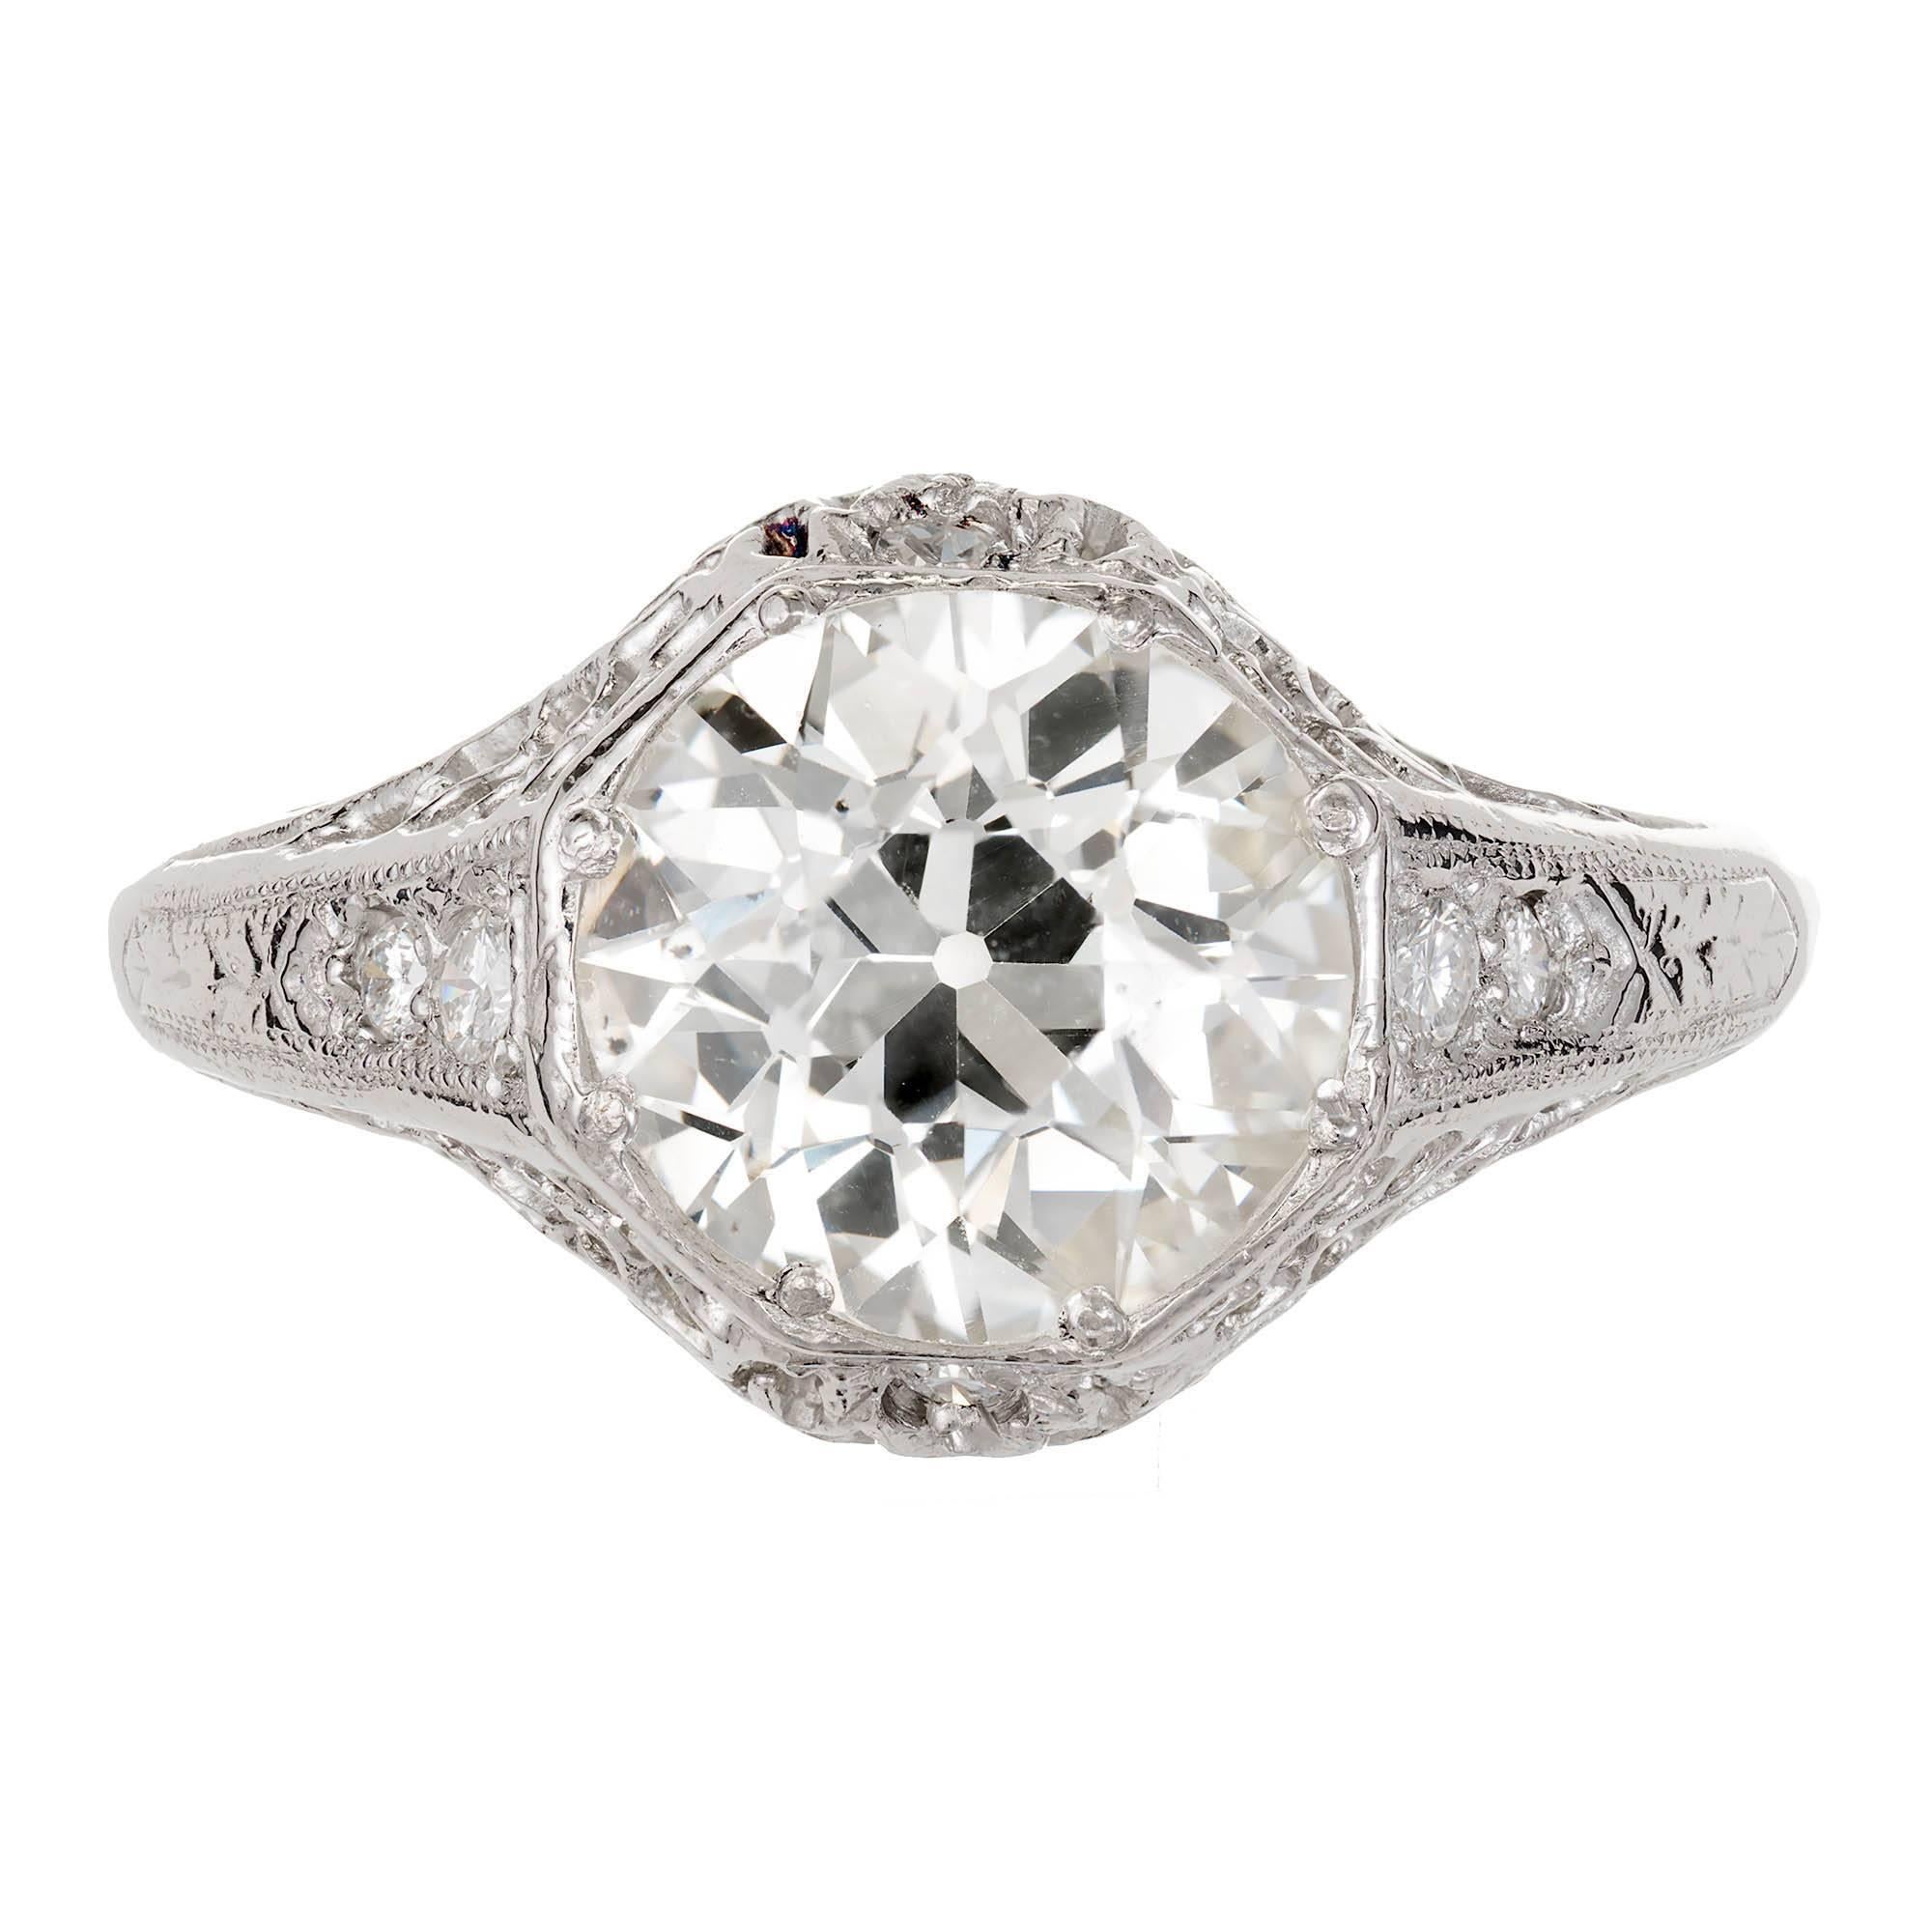 All original Edwardian Art Deco 1910 to 1920 Platinum filigree engagement ring with original old European cut diamond, K color and SI1 clarity, super bright and sparkly. Faces up with a slightly warm bright appearance.

1 old European cut diamond,